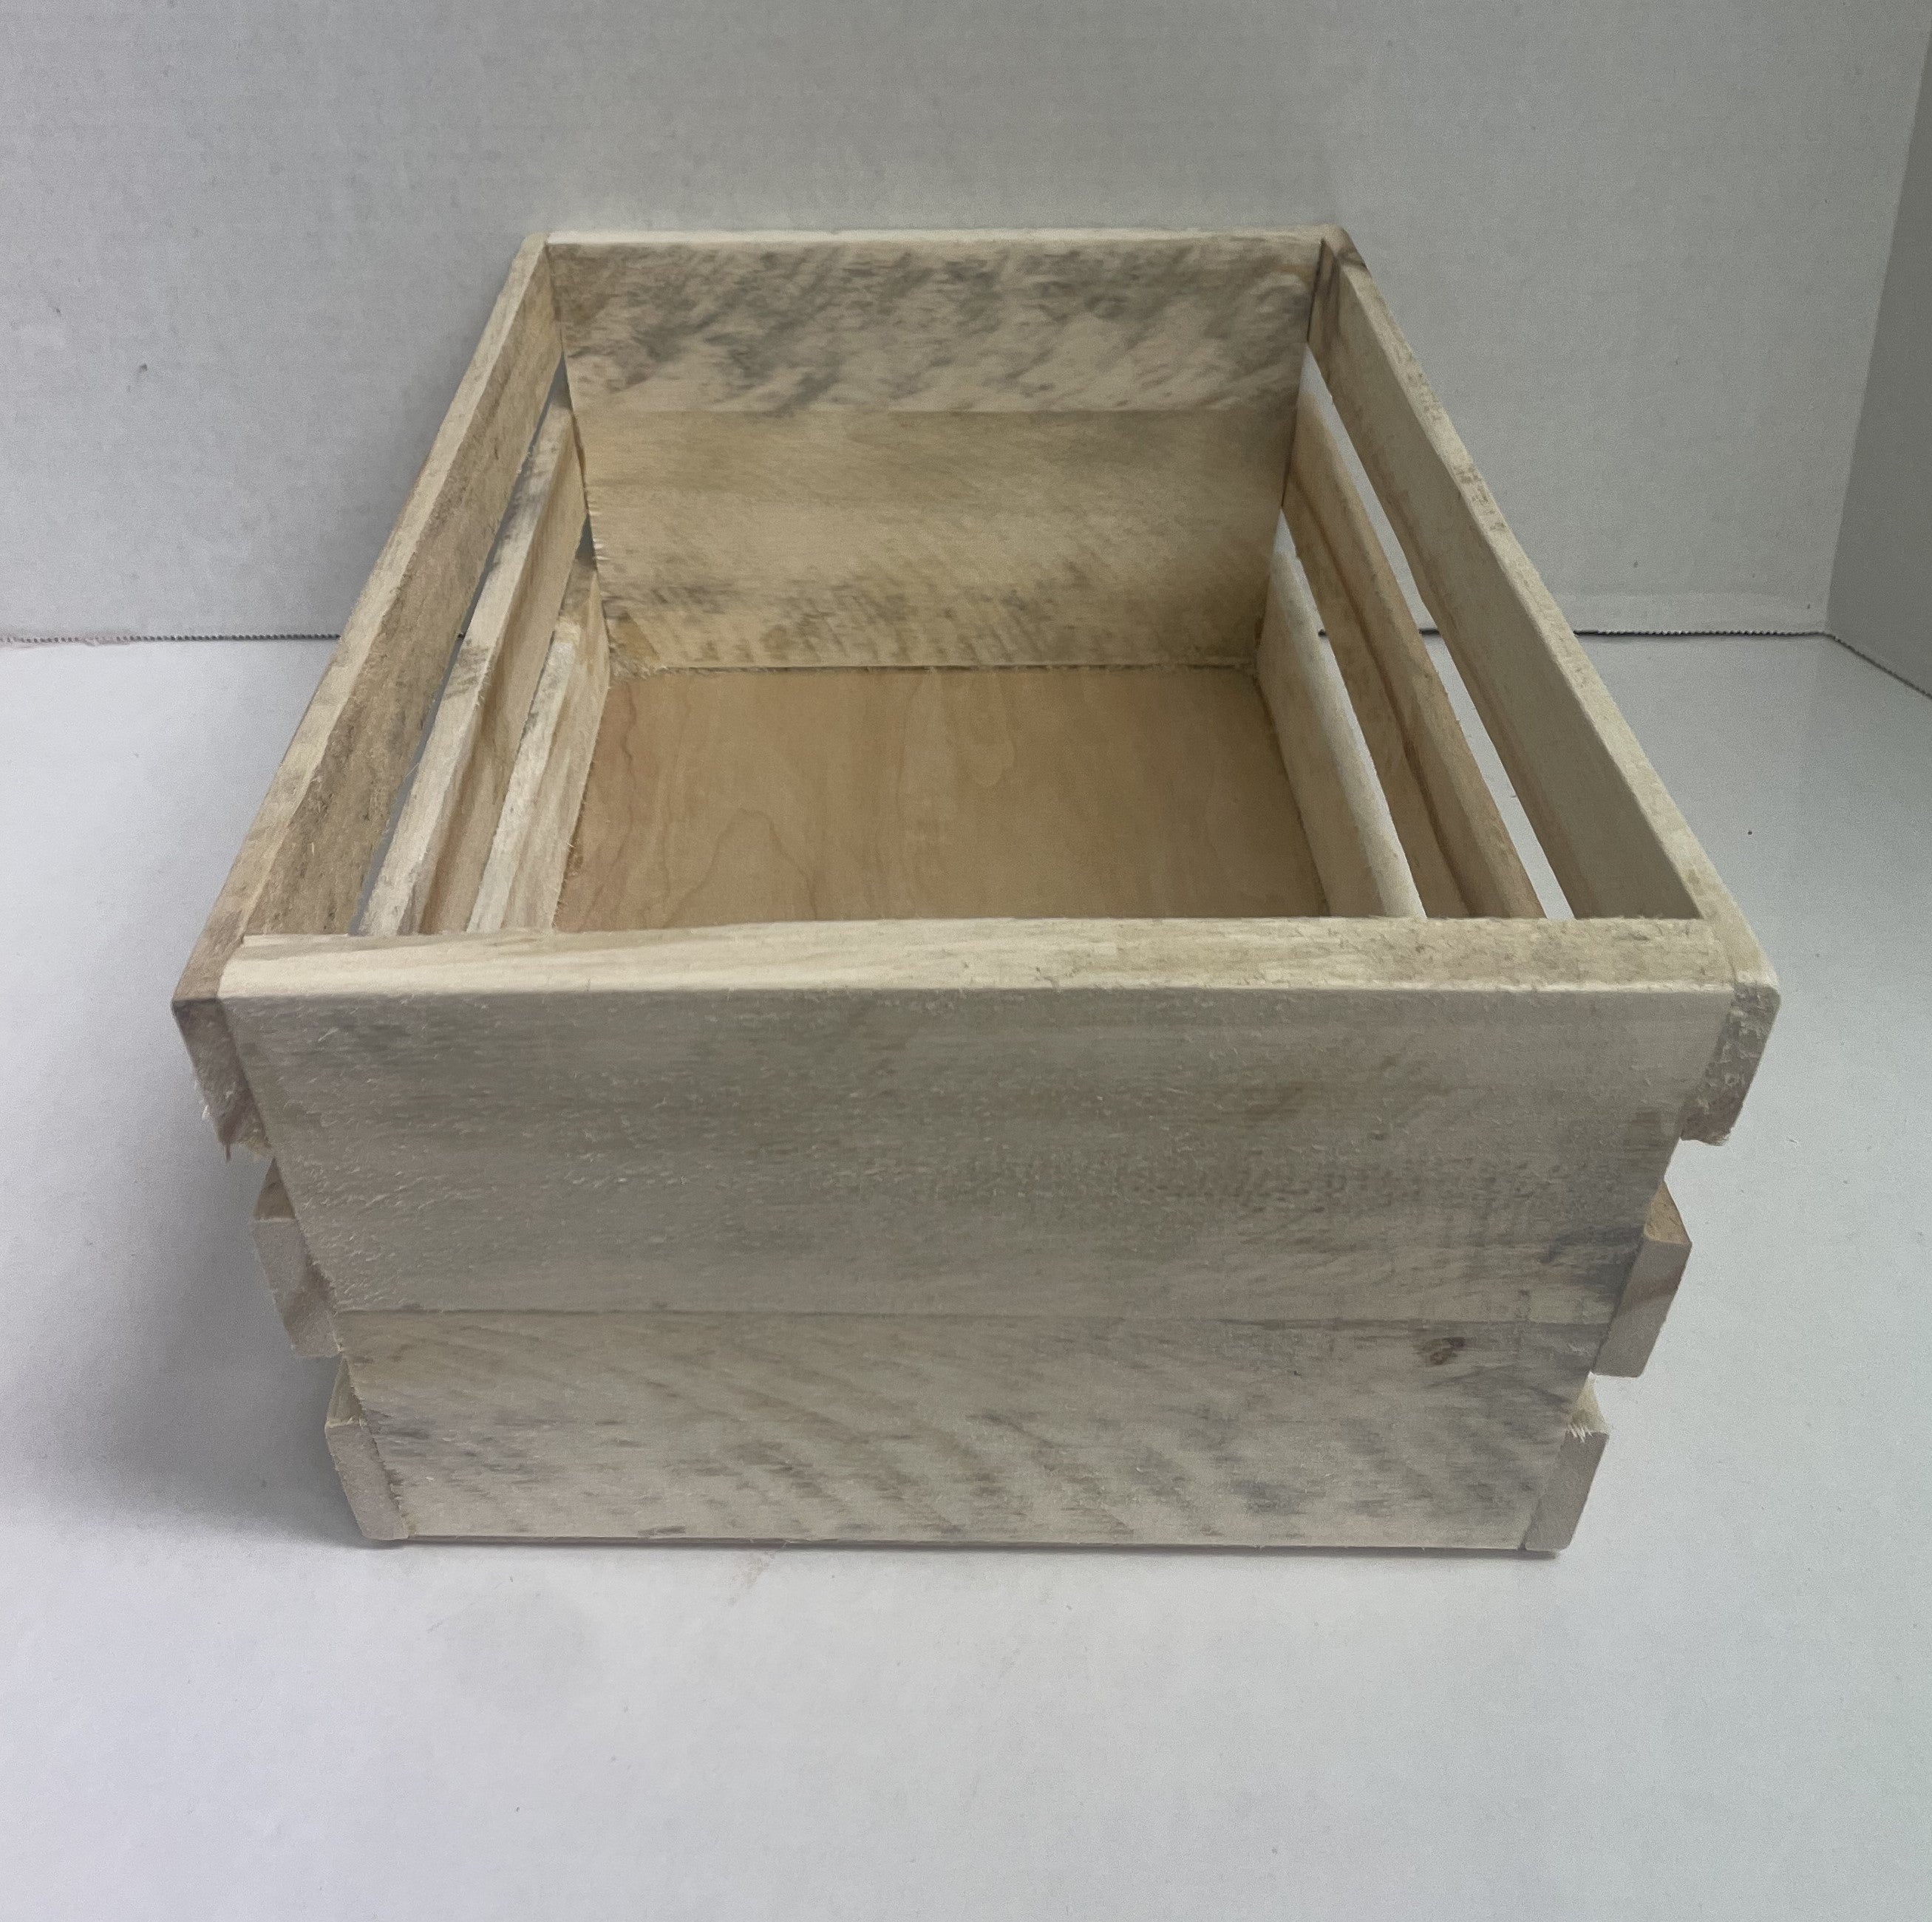 Small Wooden Crate